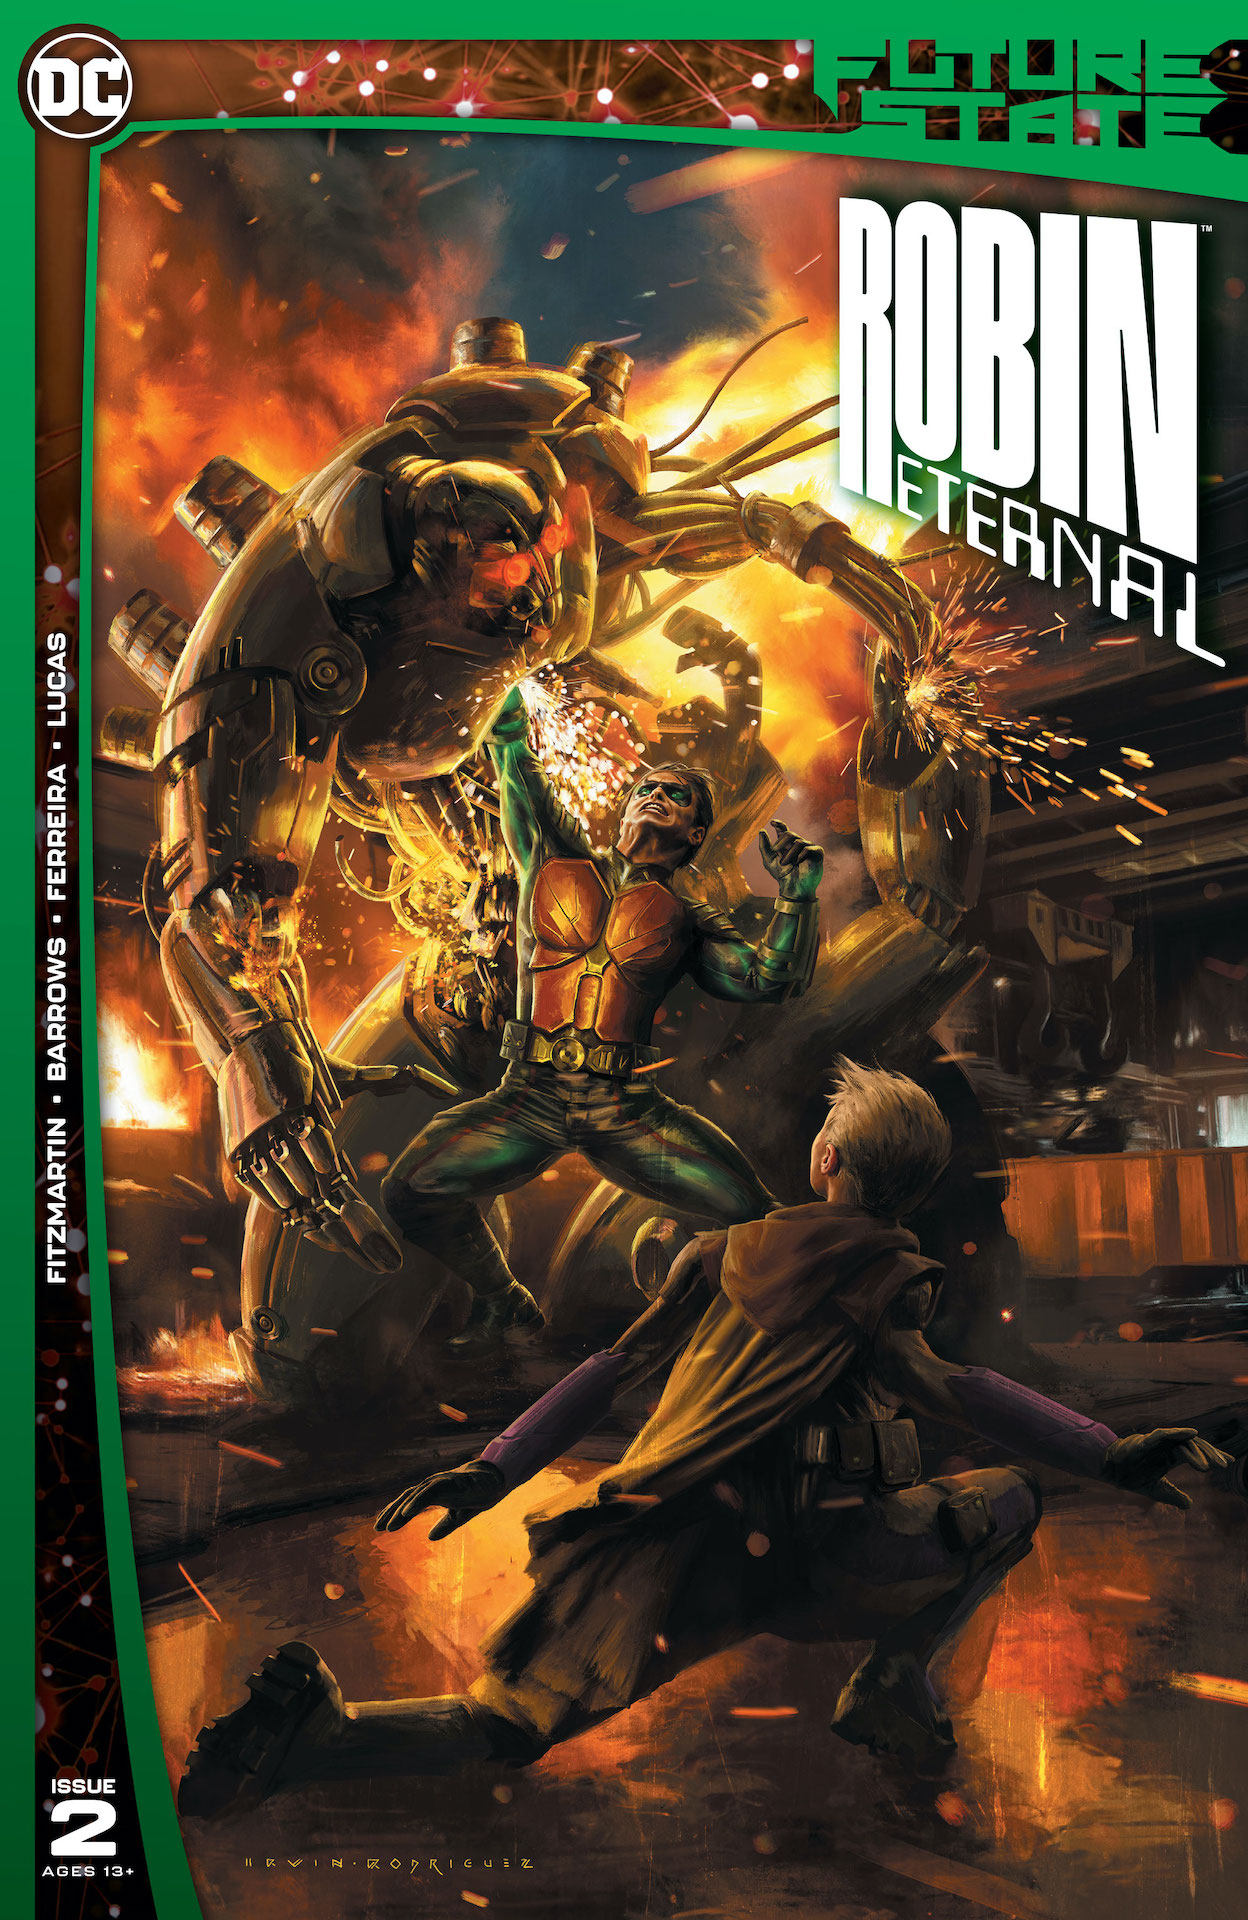 DC Preview: Future State #2: Robin Eternal